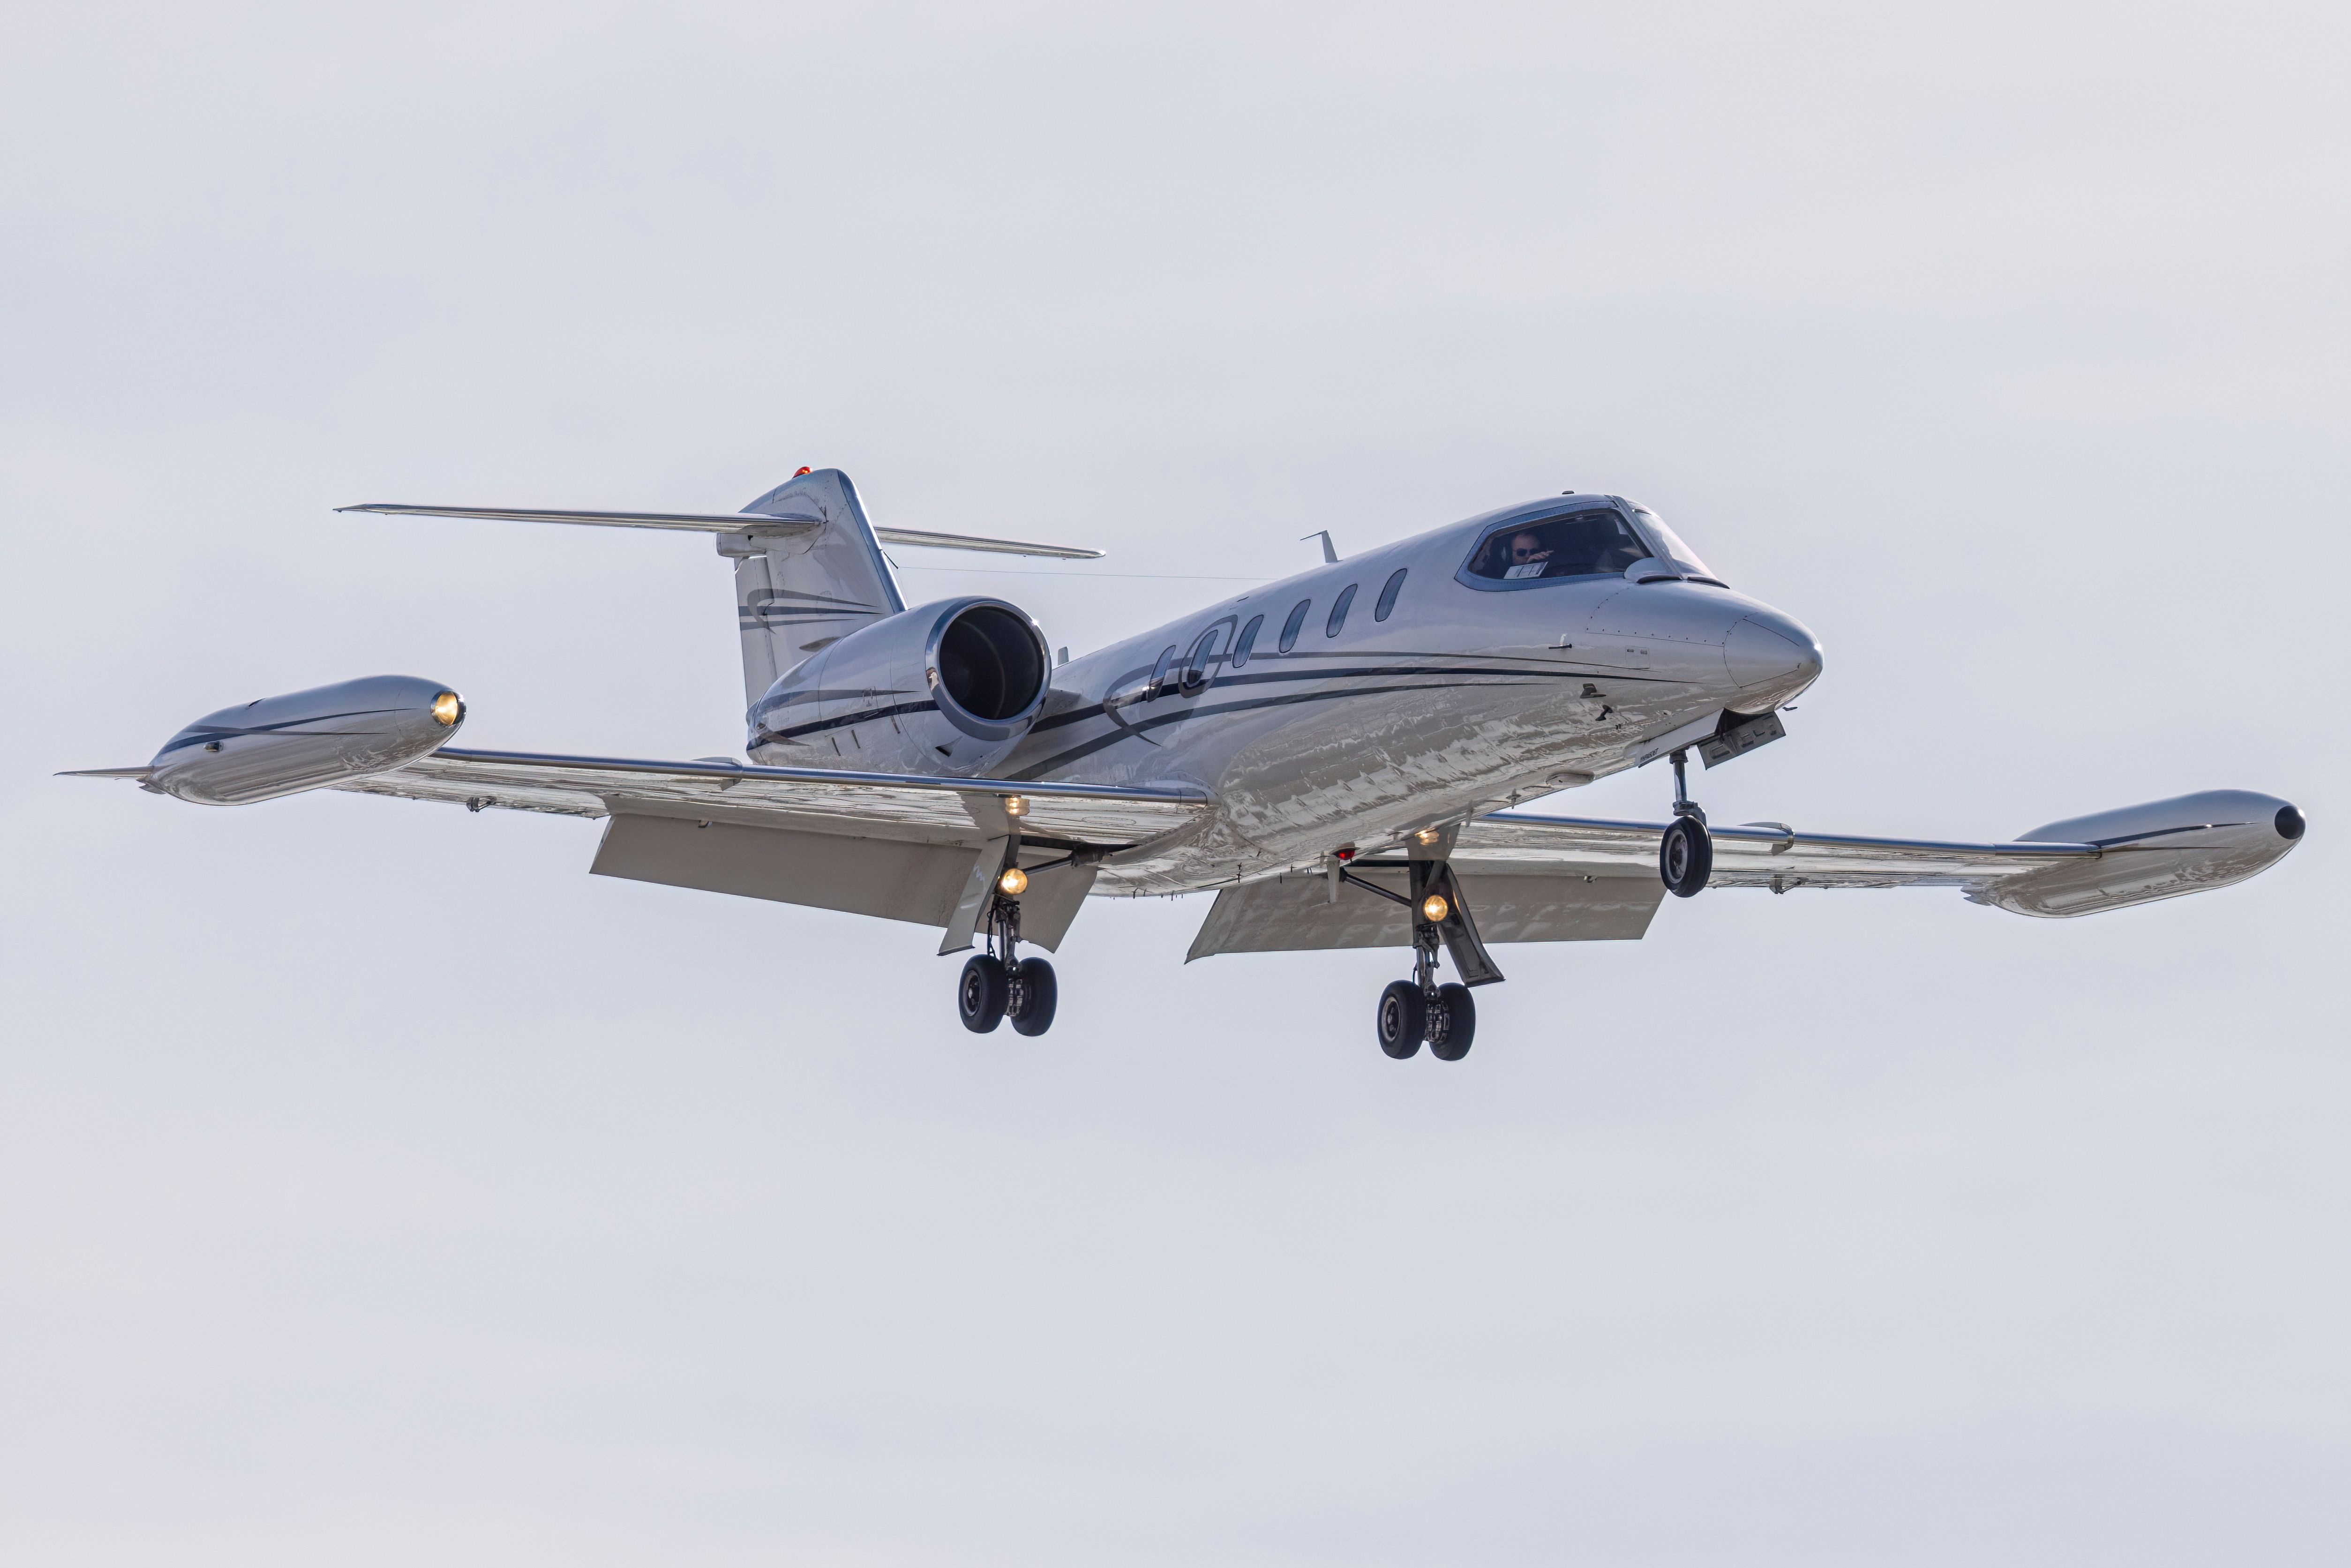 A Learjet 35 comes in for a landing at the Centennial Airport